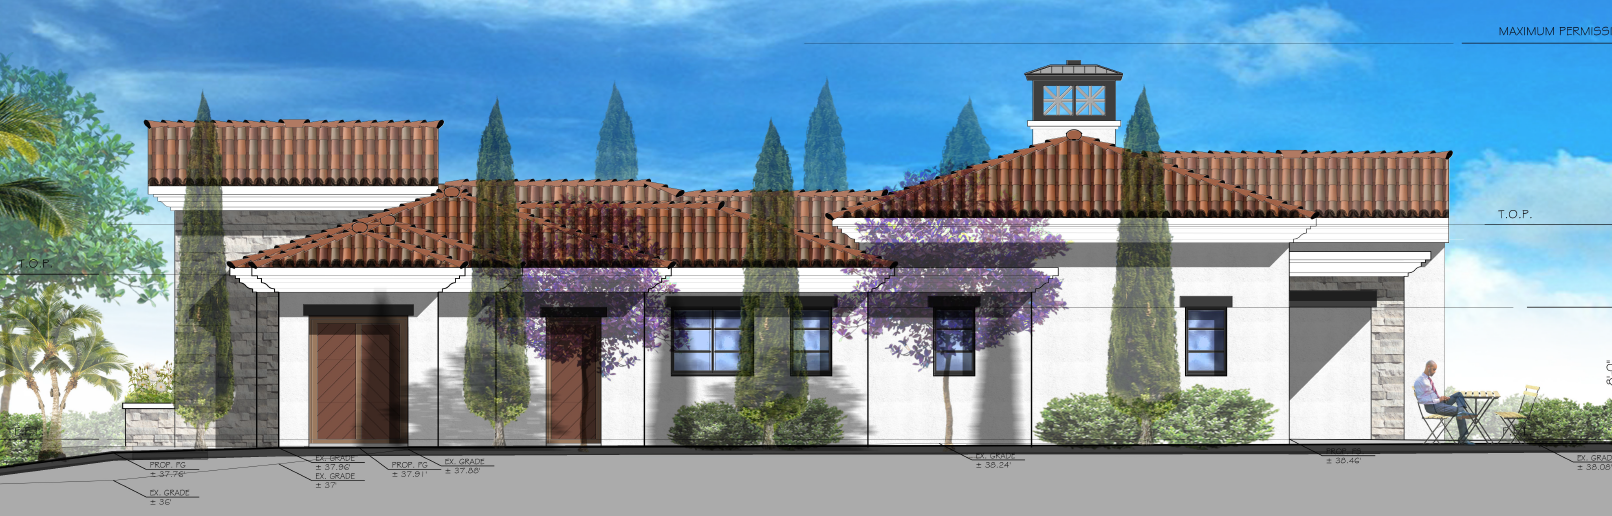 04-yng-architects-on-the-boards-la-quinta-lot-23-north-elevation.png